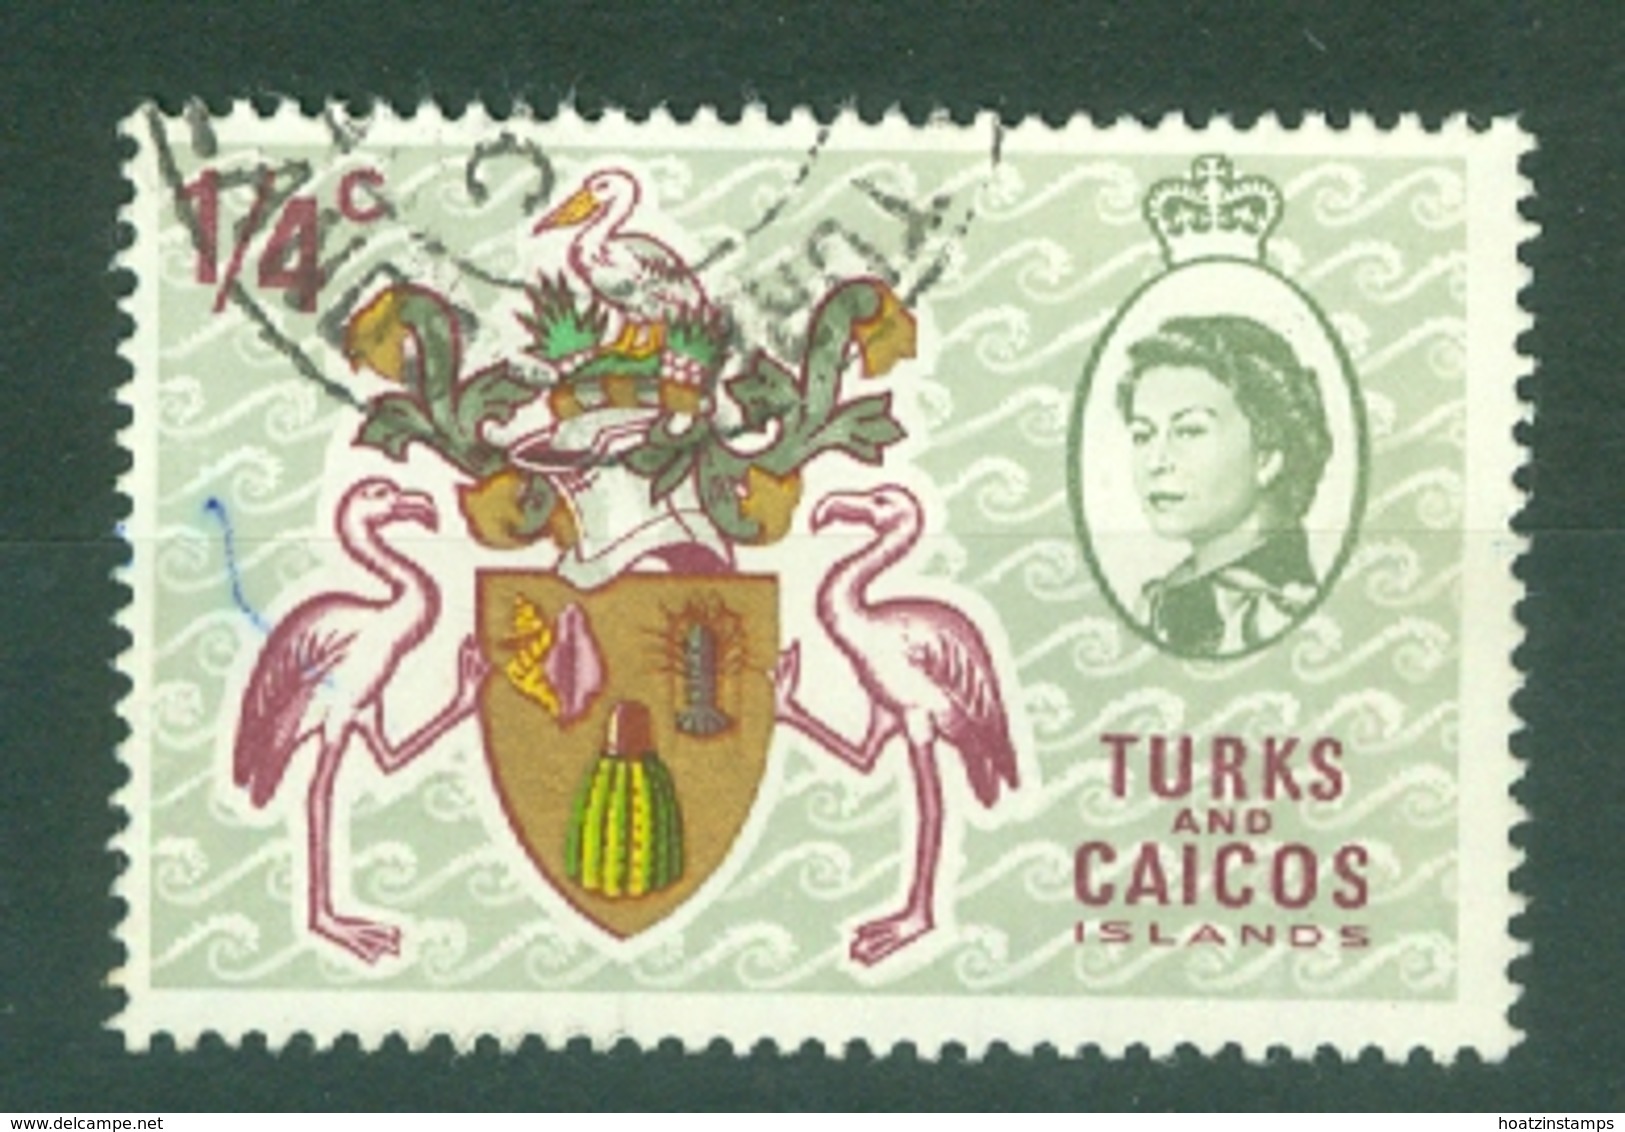 Turks & Caicos Is: 1969/71   QE II - Pictorial - Decimal Currency  SG297  ¼c   Pale Greenish Grey & Multicoloured Used - Turks And Caicos